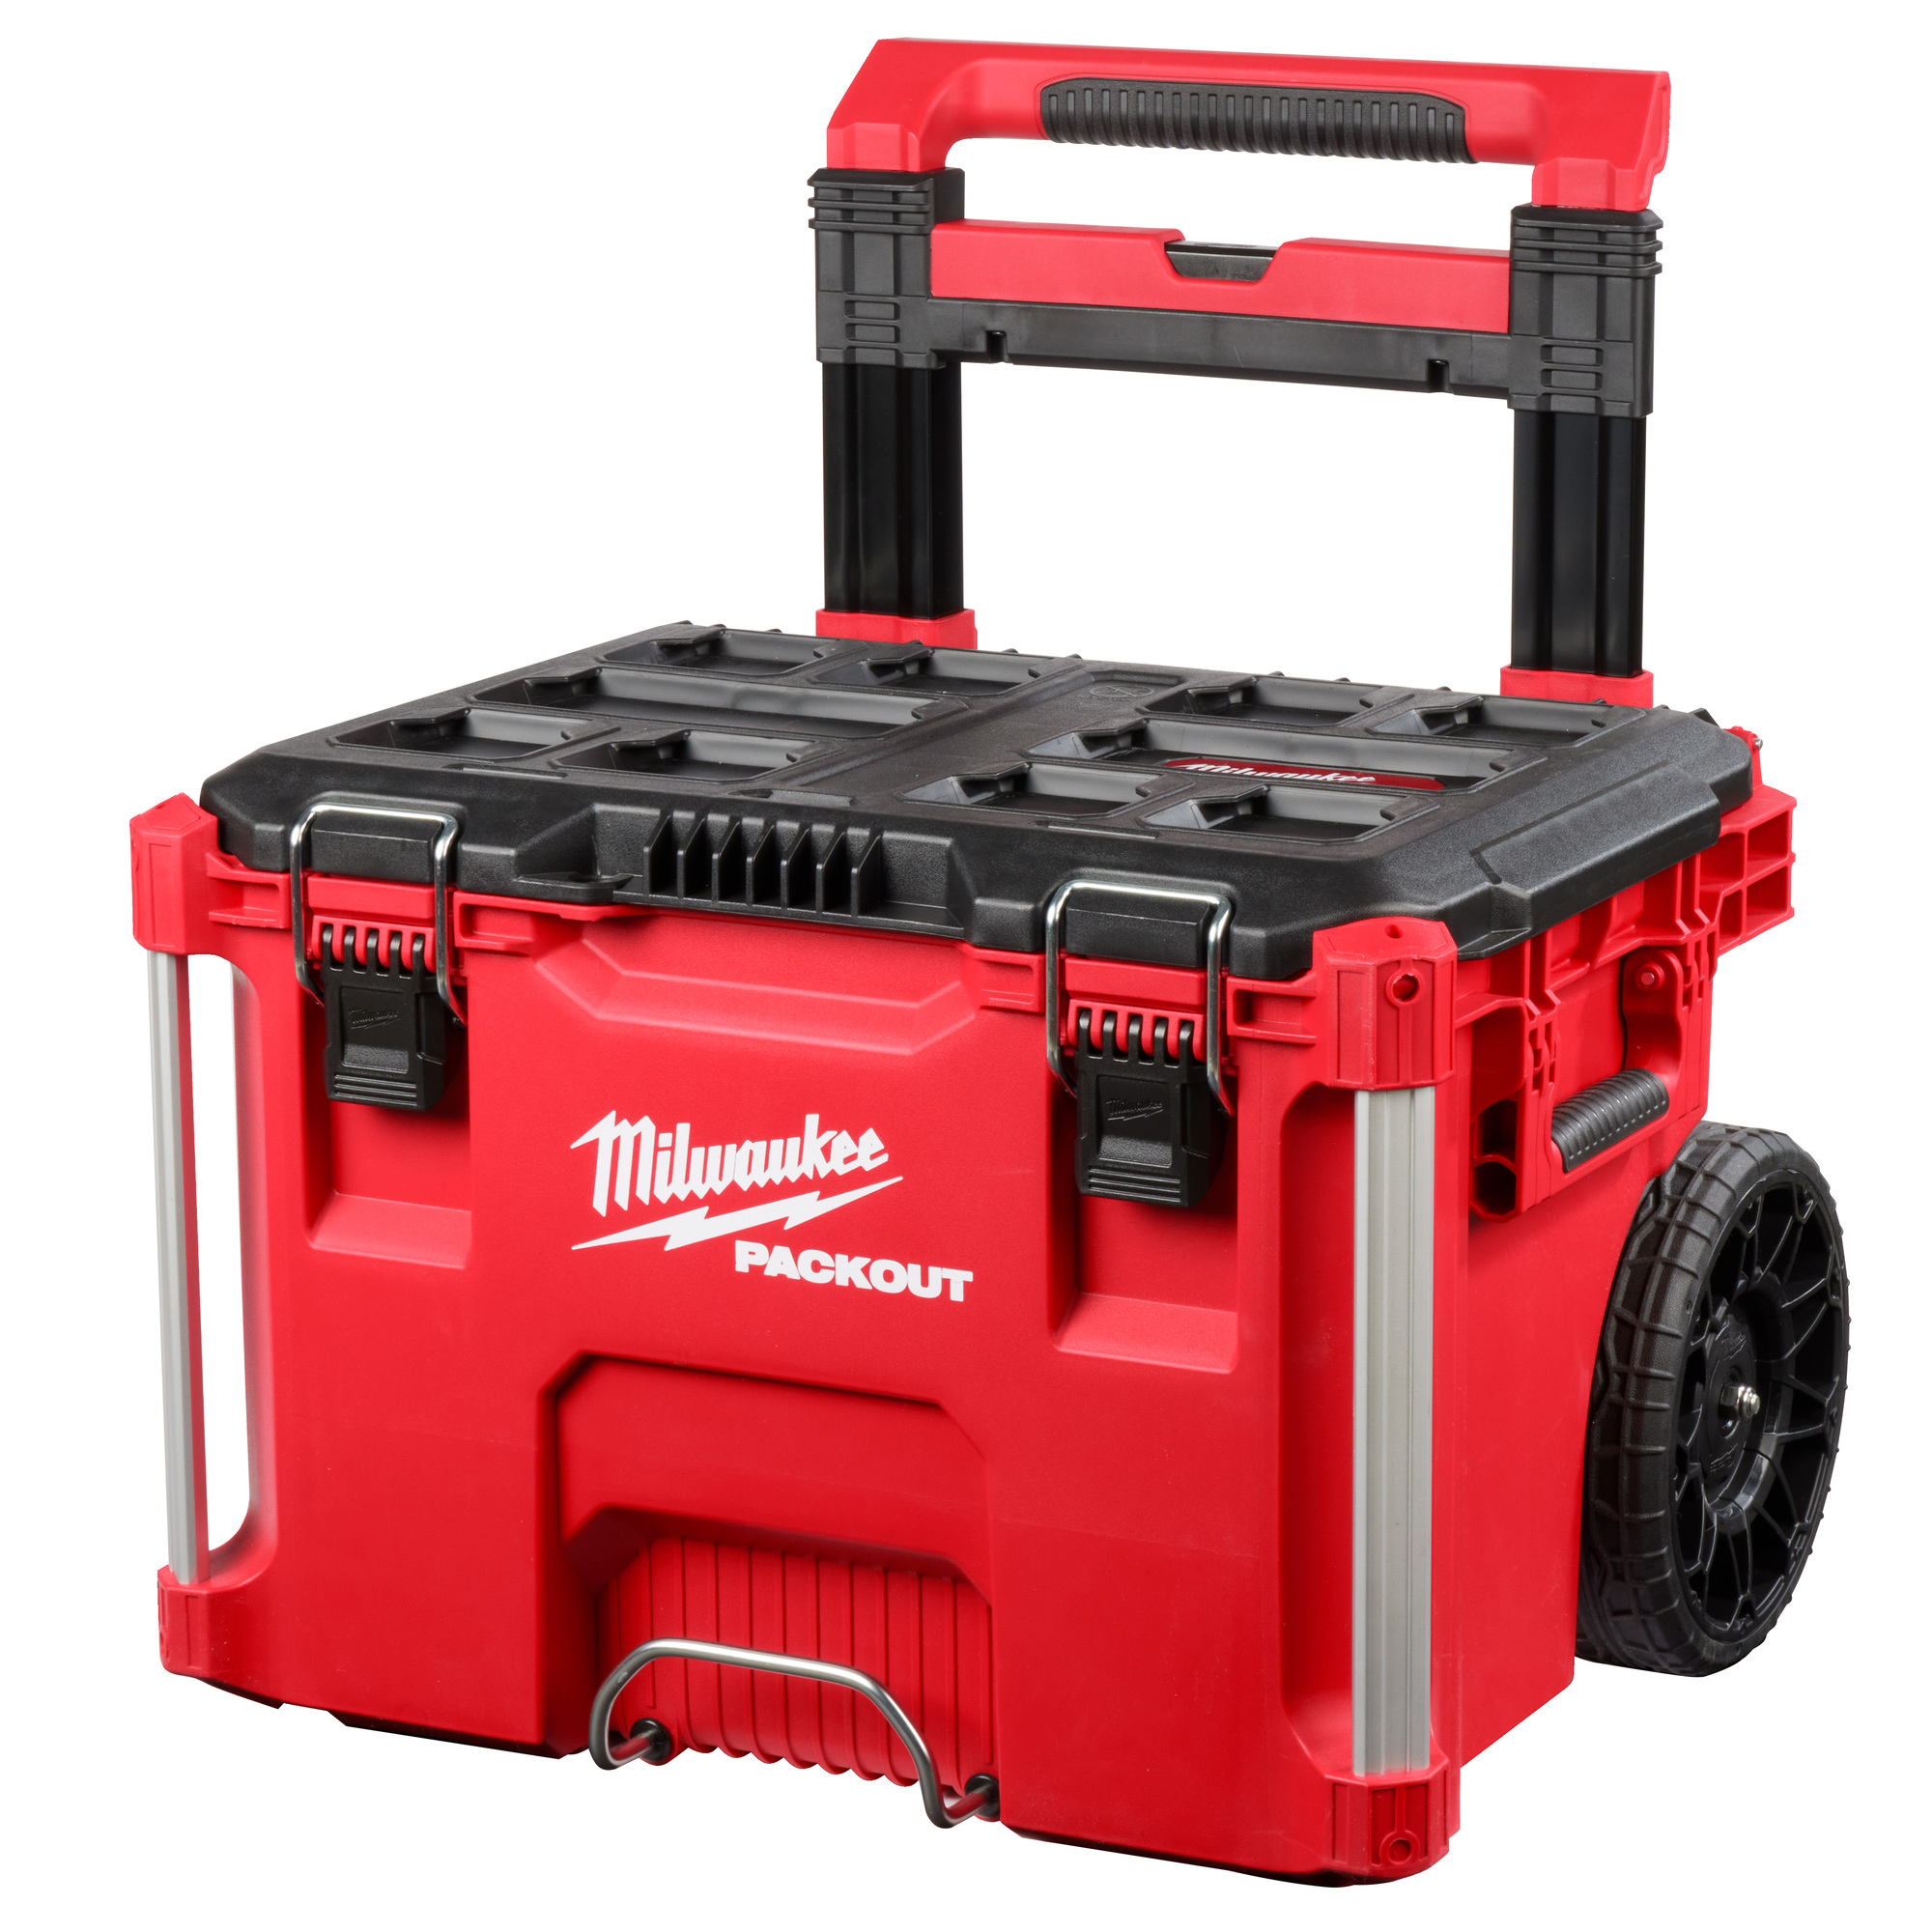 Packout Rolling Toolbox — 22.1Inch L x 18.9Inch W x 25.6Inch H, Model - Milwaukee 48-22-8426